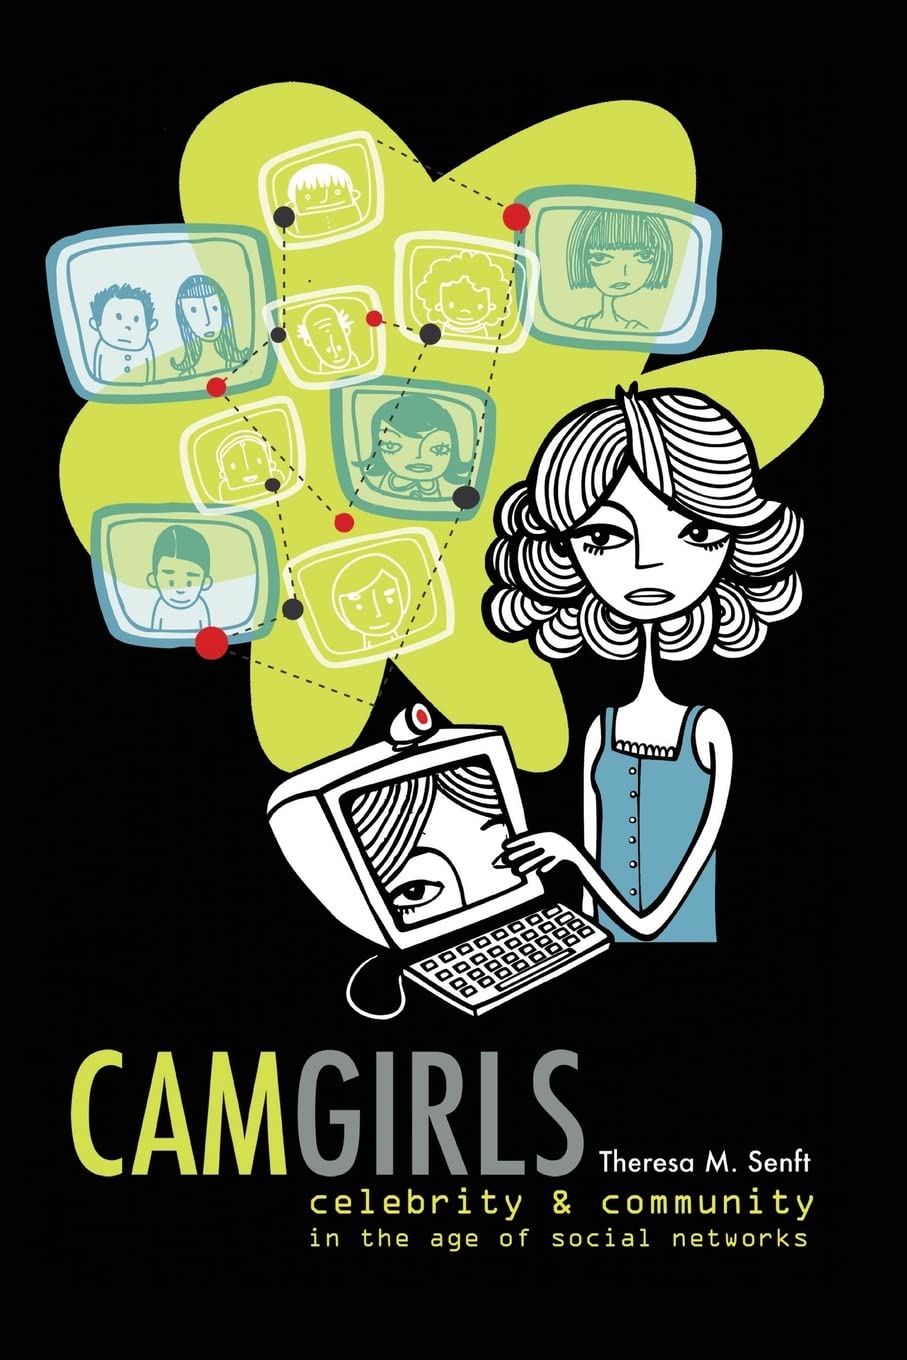 Camgirls: Celebrity and Community in the Age of Social Networks